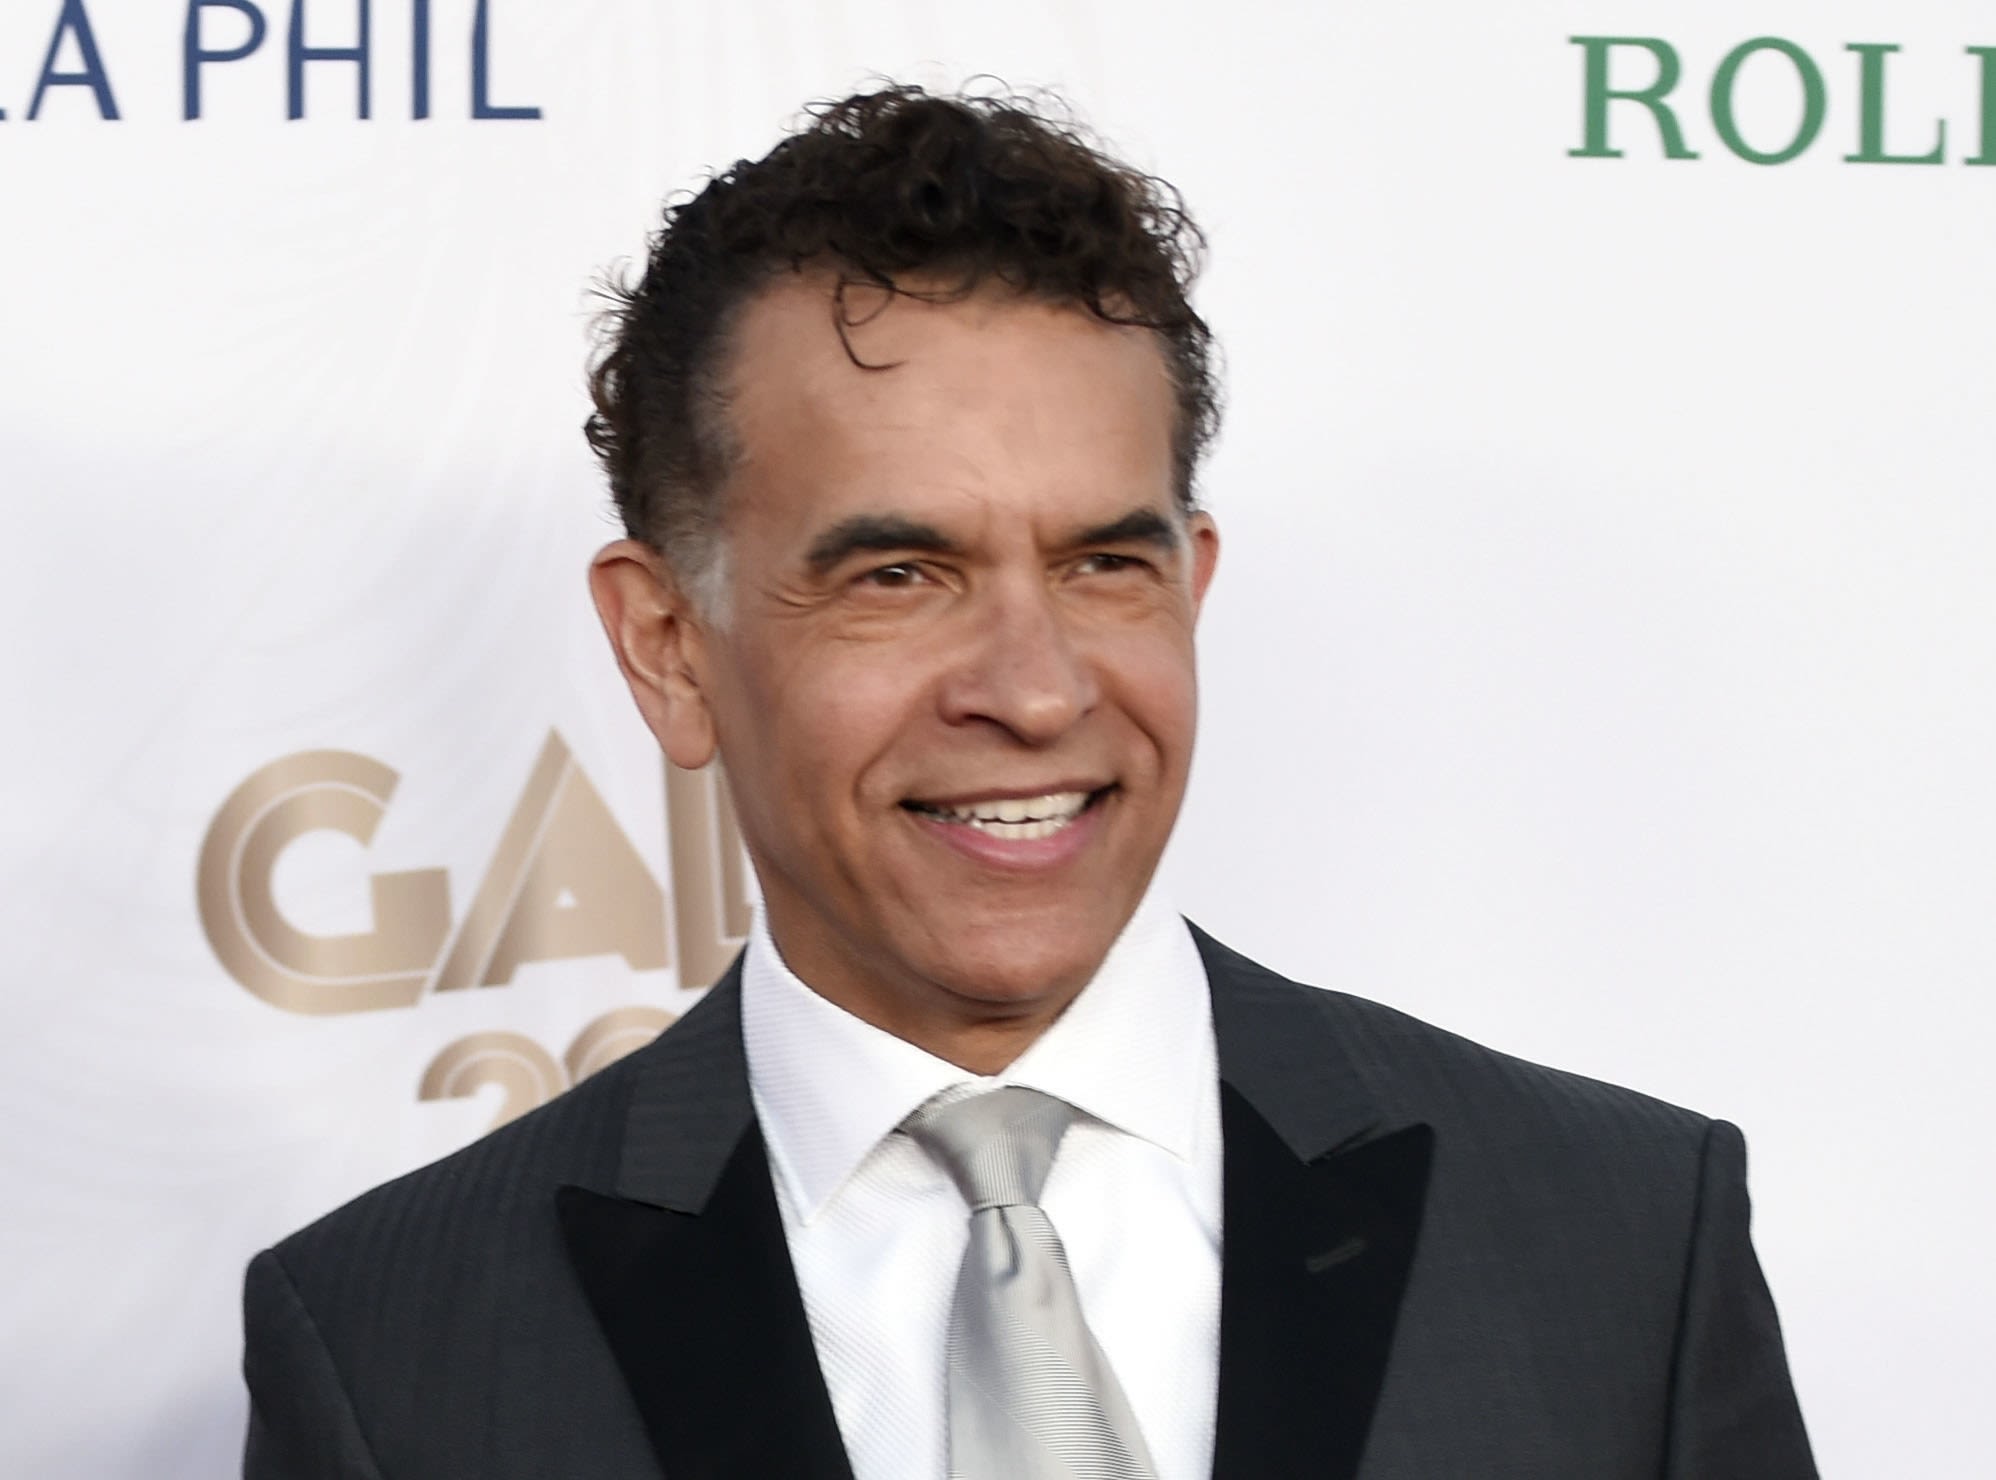 Tony winner Brian Stokes Mitchell headlines ‘Broadway in Bethesda’ at Round House Theatre - WTOP News